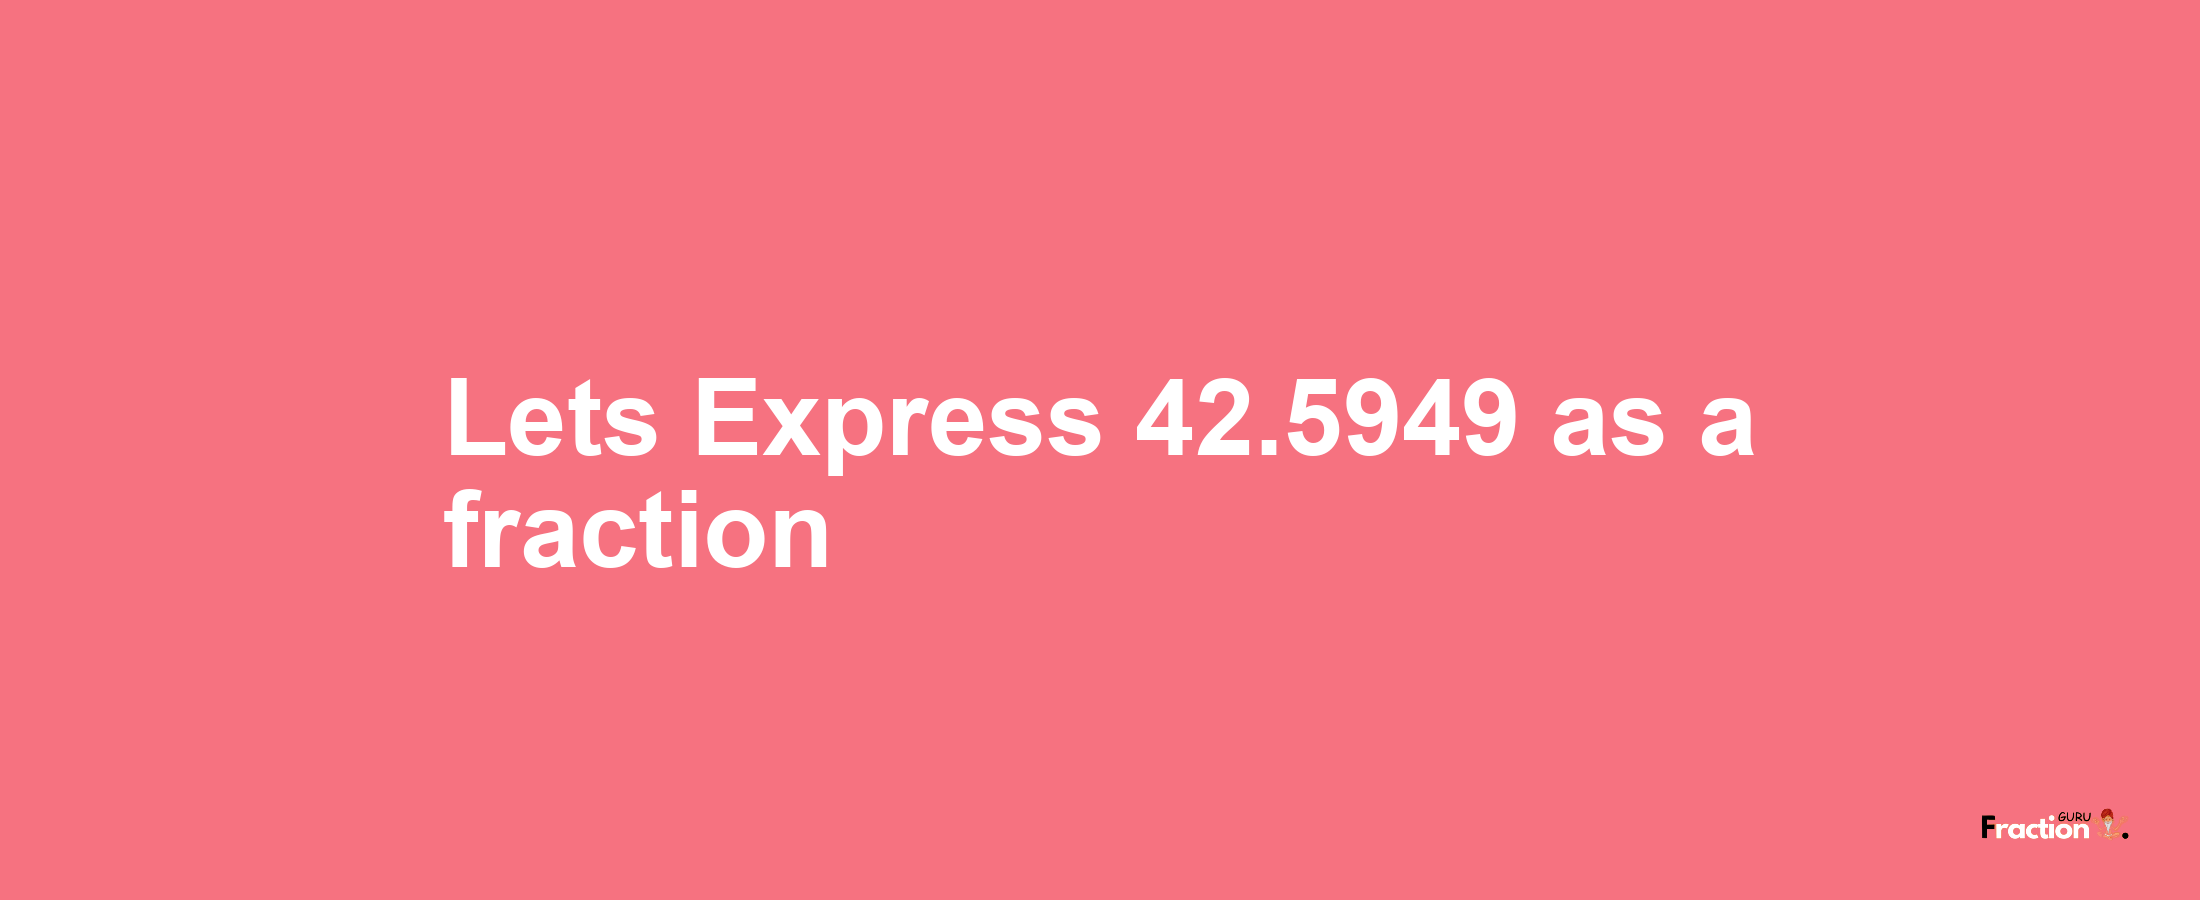 Lets Express 42.5949 as afraction